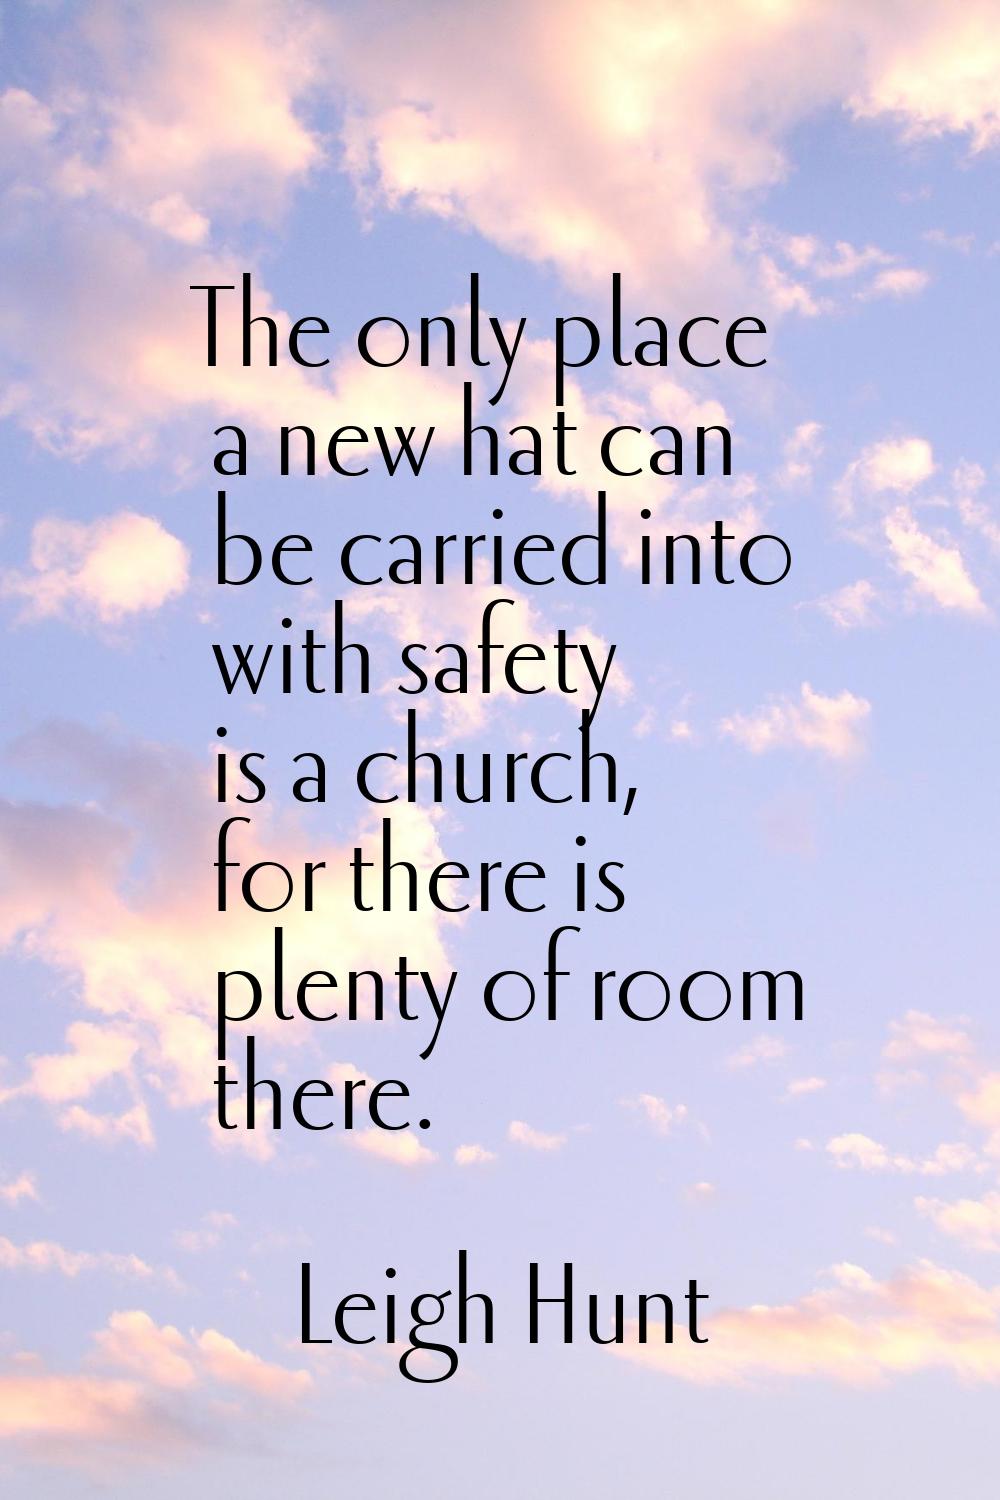 The only place a new hat can be carried into with safety is a church, for there is plenty of room t